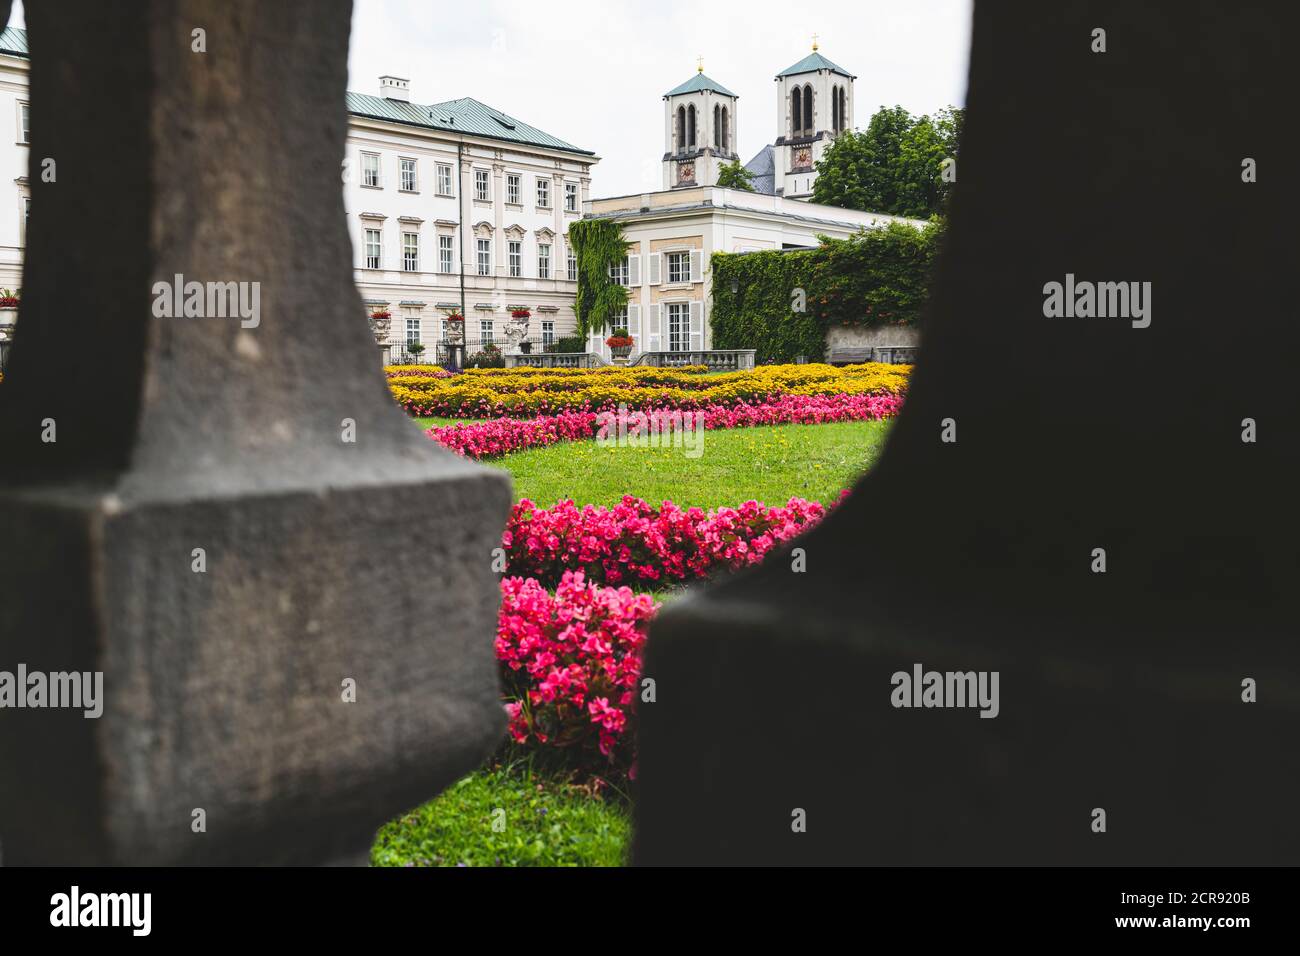 Mirabellgarten, Schlossgarten, Mirabell Palace, with the towers of the Andräkirche in the background, Salzburg, Austria, Europe Stock Photo